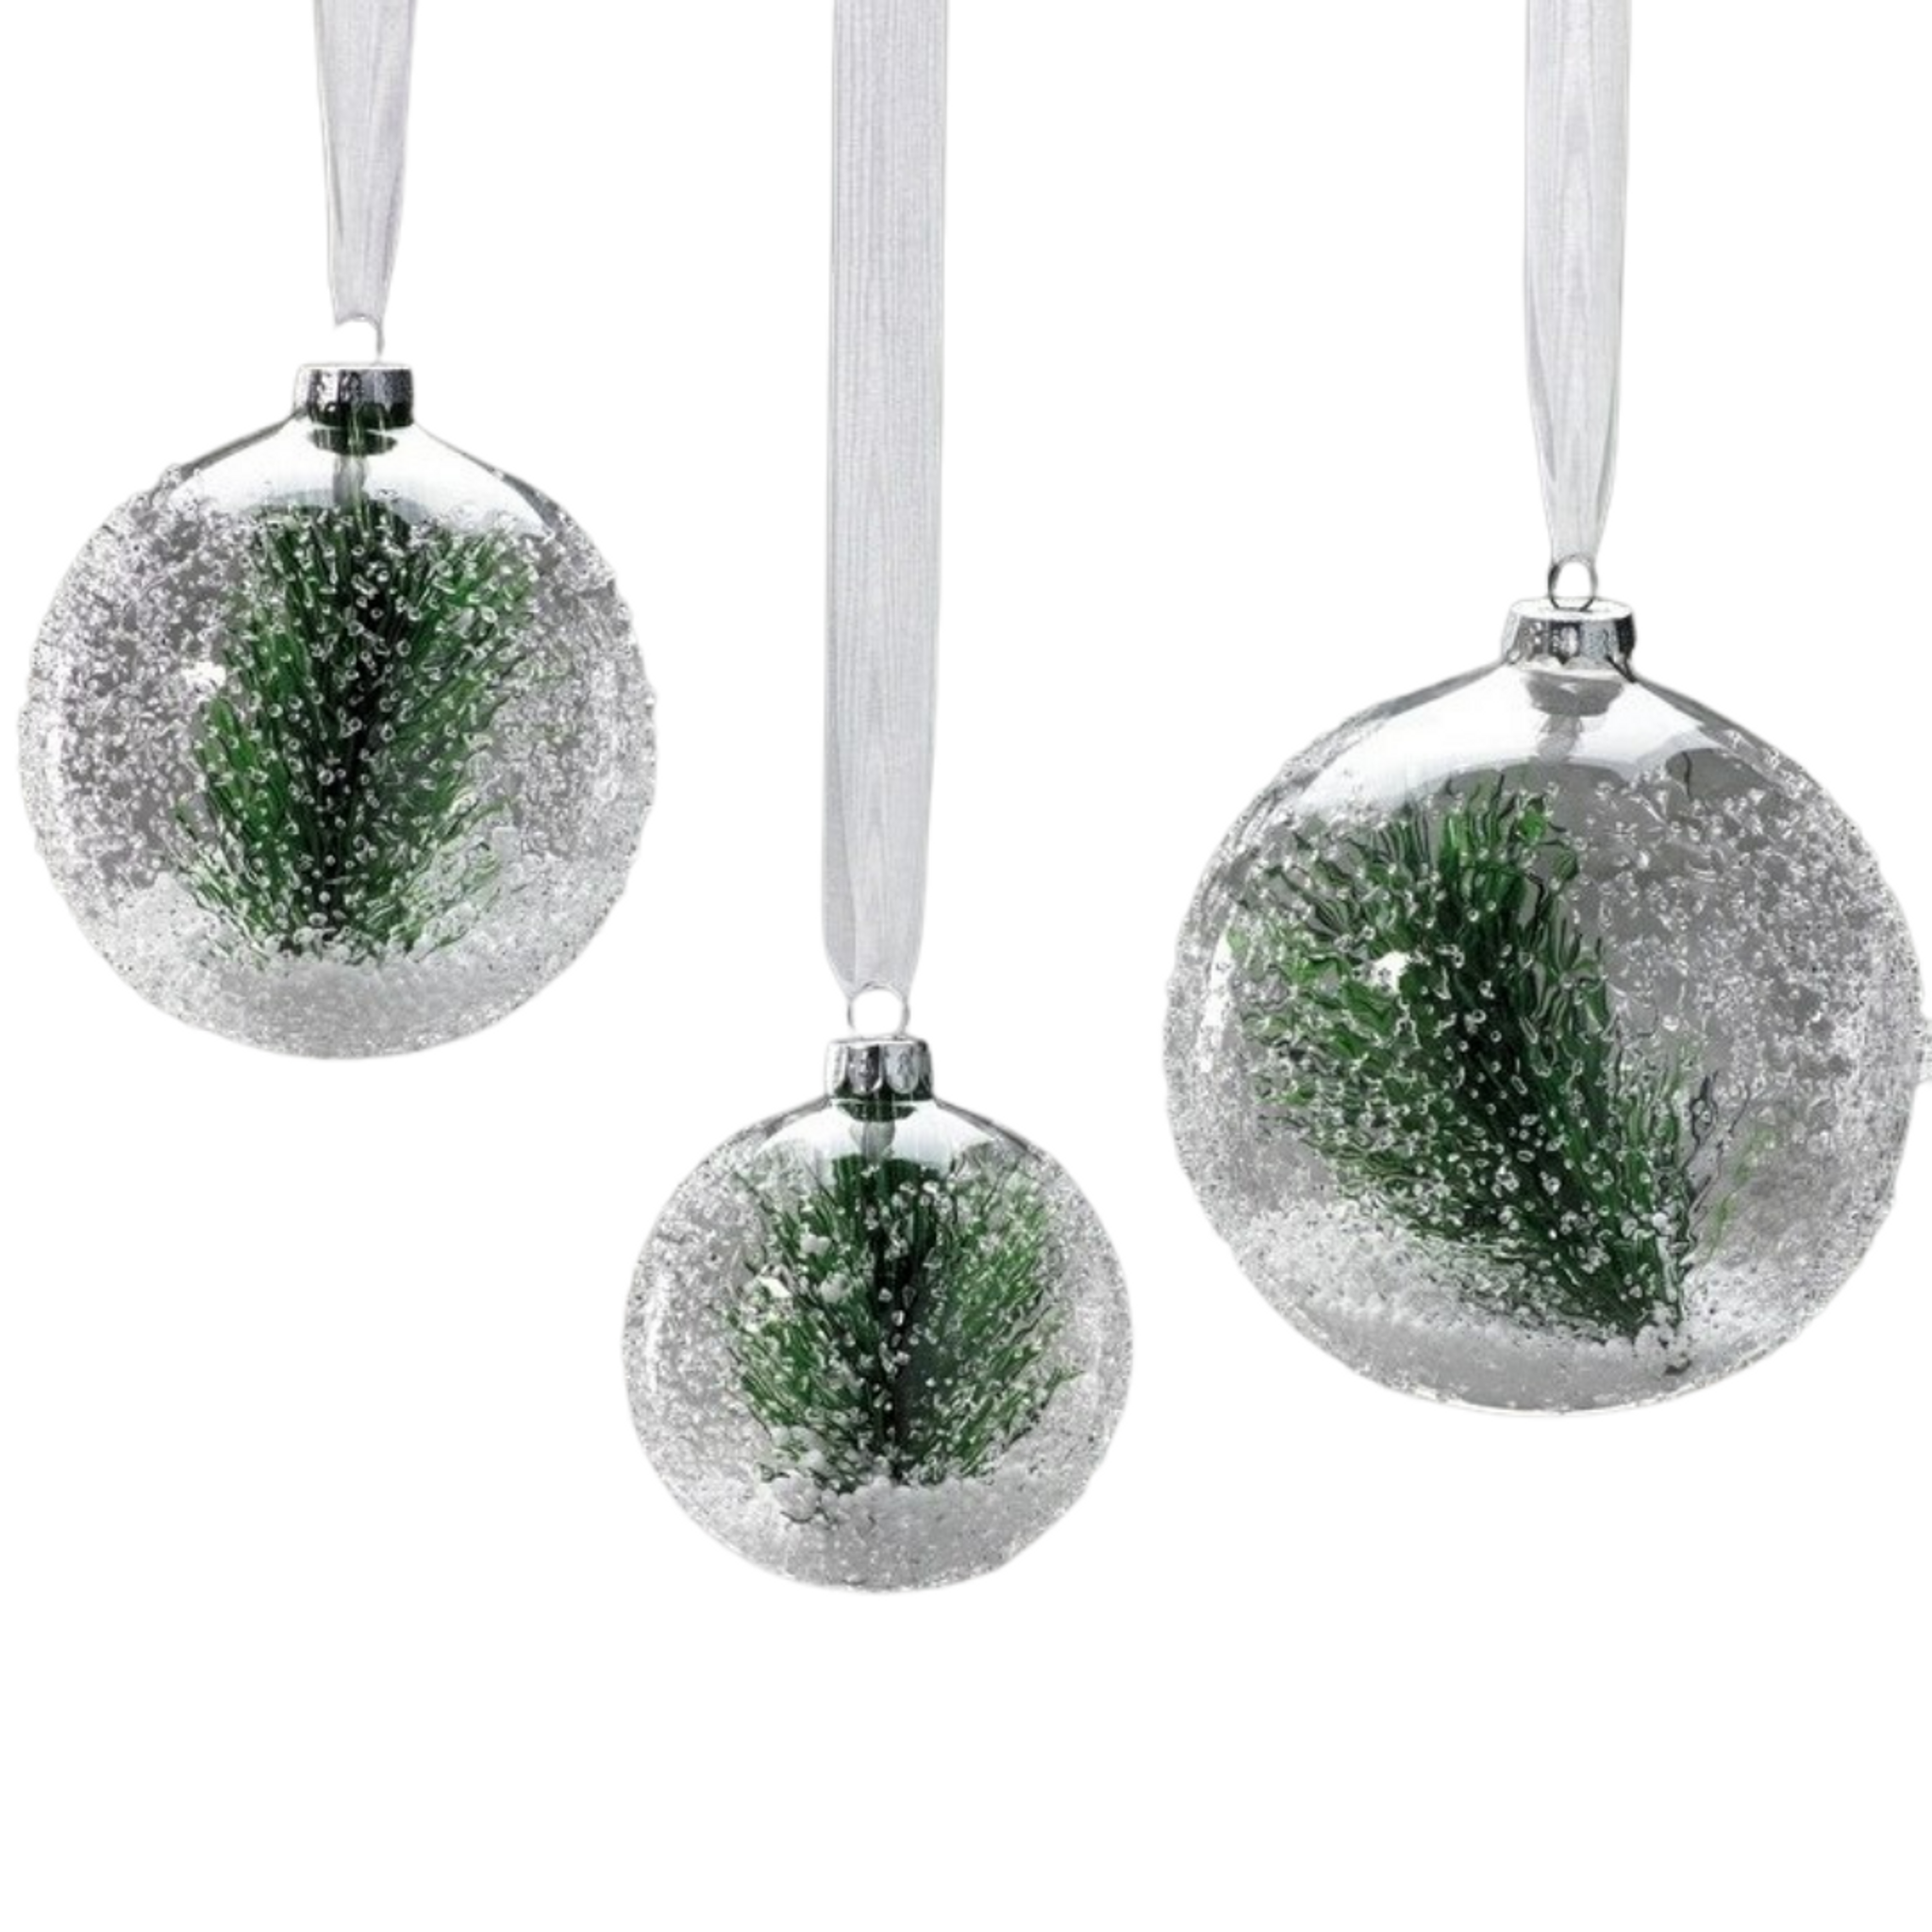 Set of 4 Modern Clear Glass Balls with Pine Needles